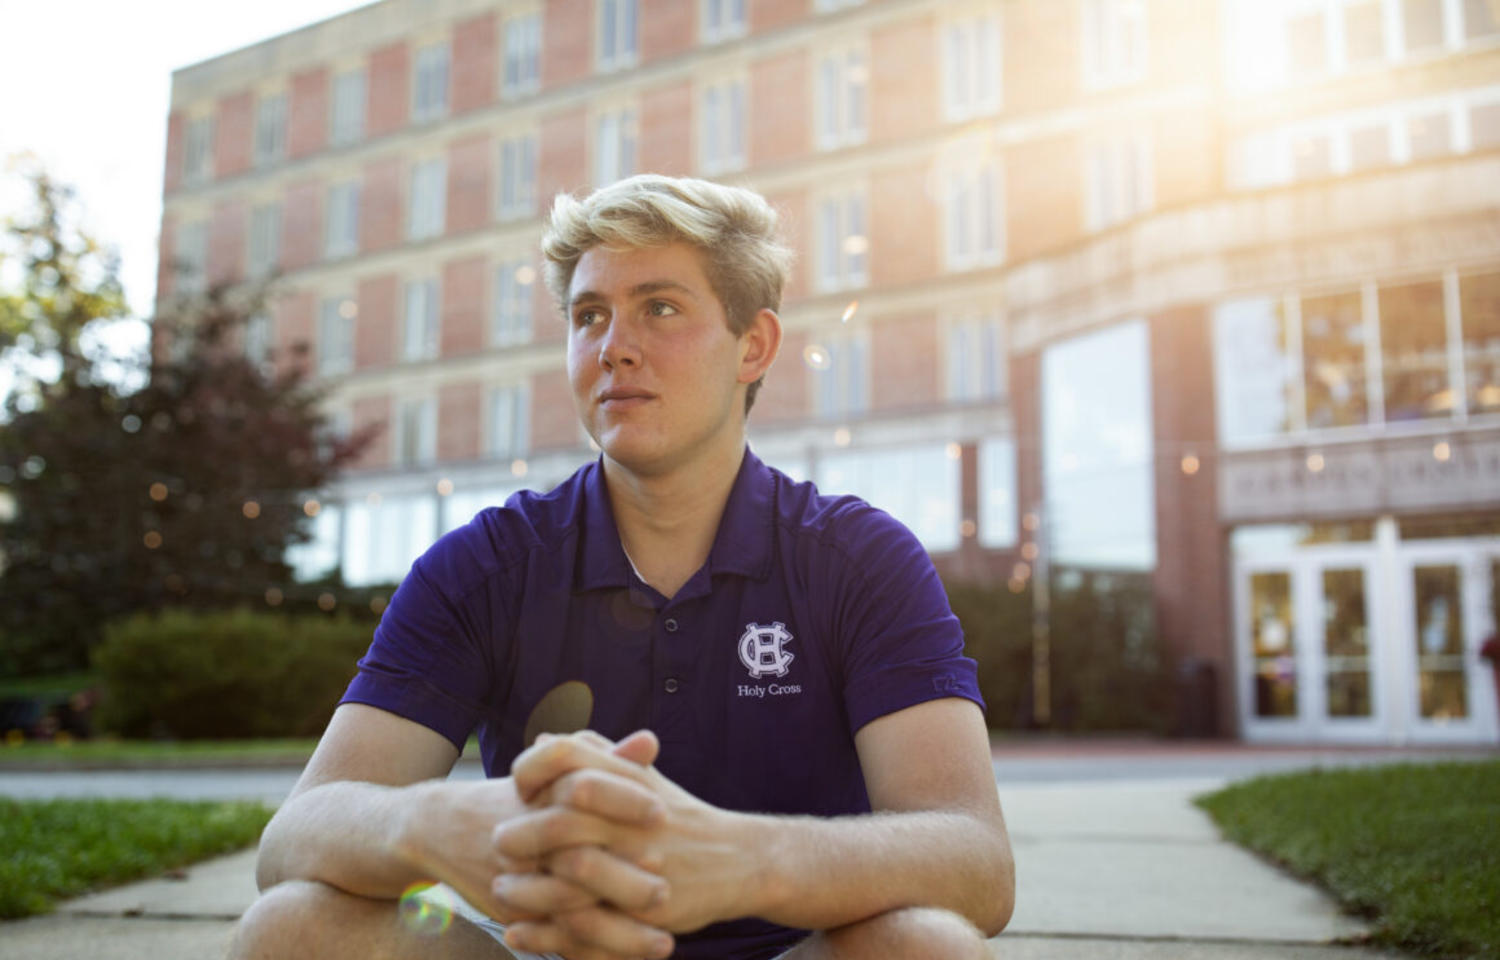 Man with blond hair sits with arms crossed in front of brick building with sun shining behind head.